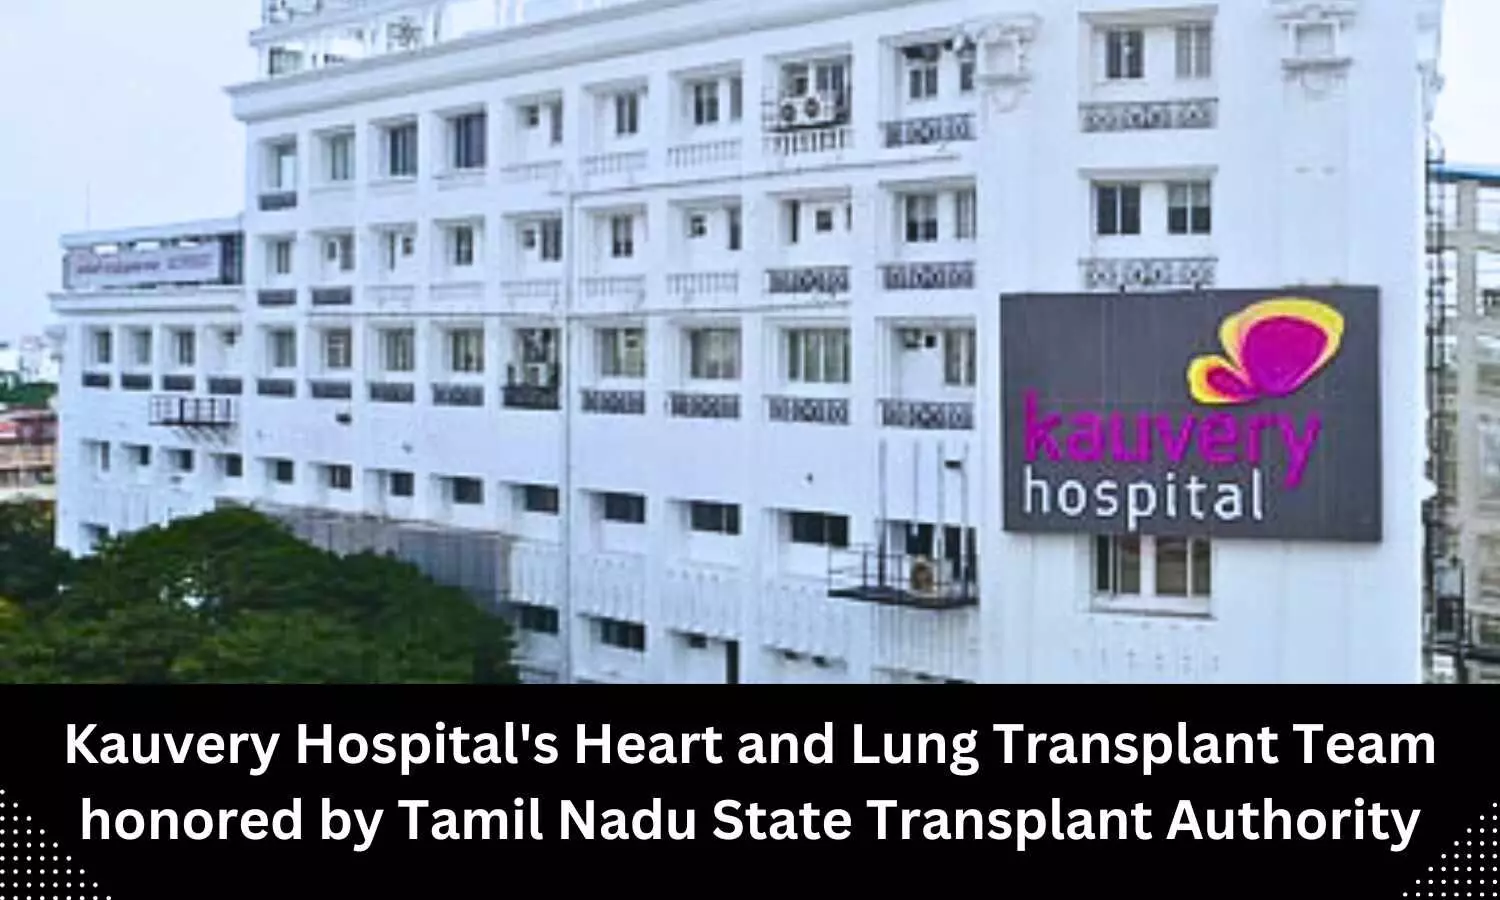 Heart and Lung Transplant Team of Kauvery Hospital honored by Tamil Nadu State Transplant Authority